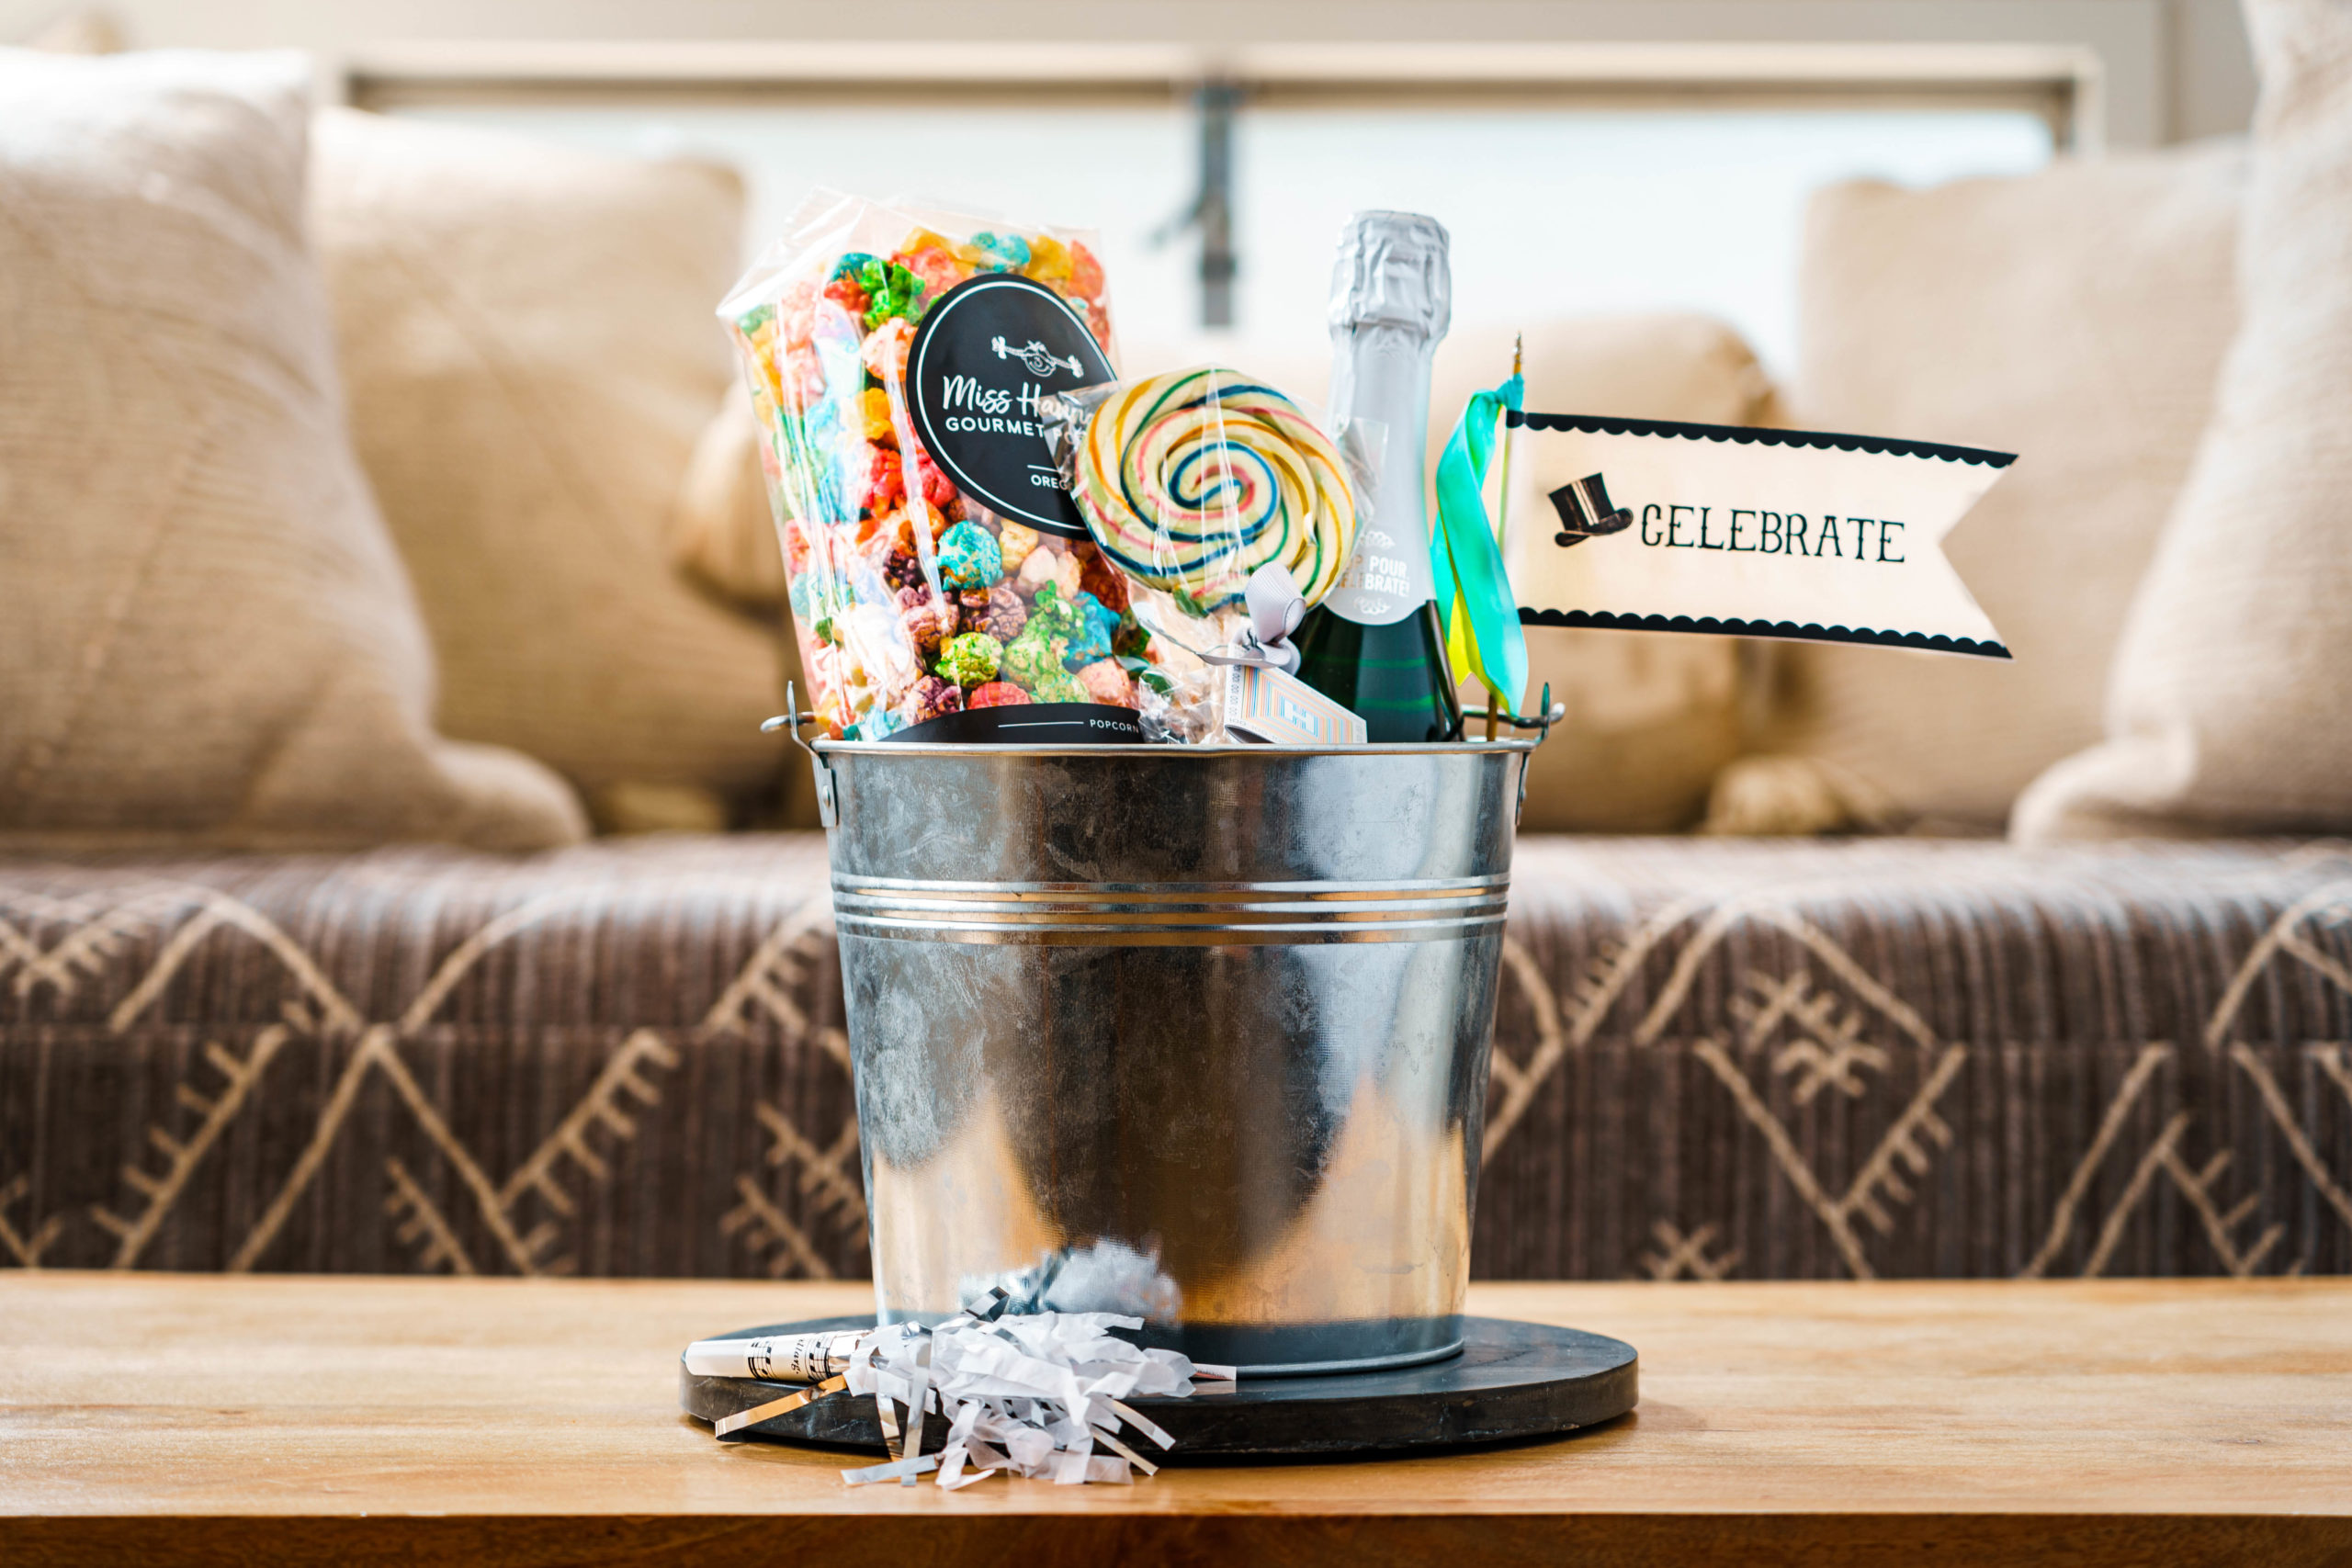 Popcorn and Wine Celebration Package